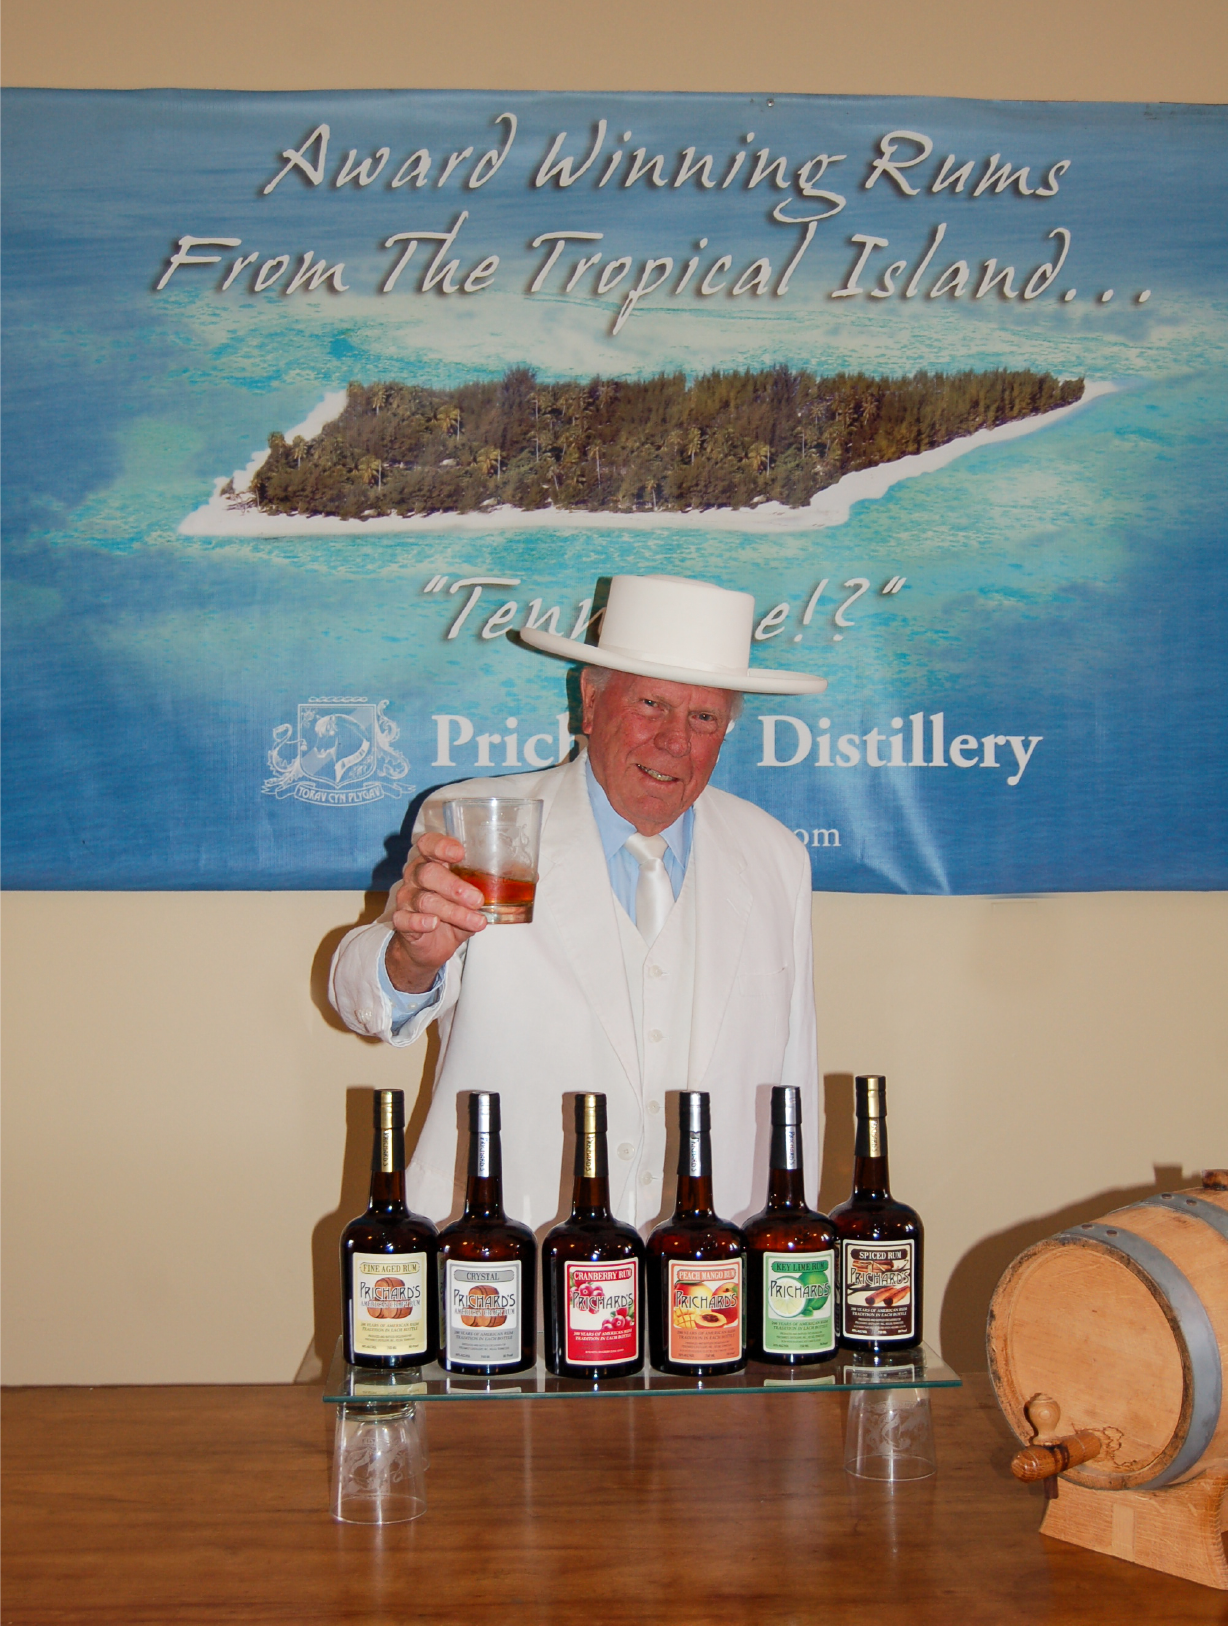 Phil Prichard with new Rum Bottles